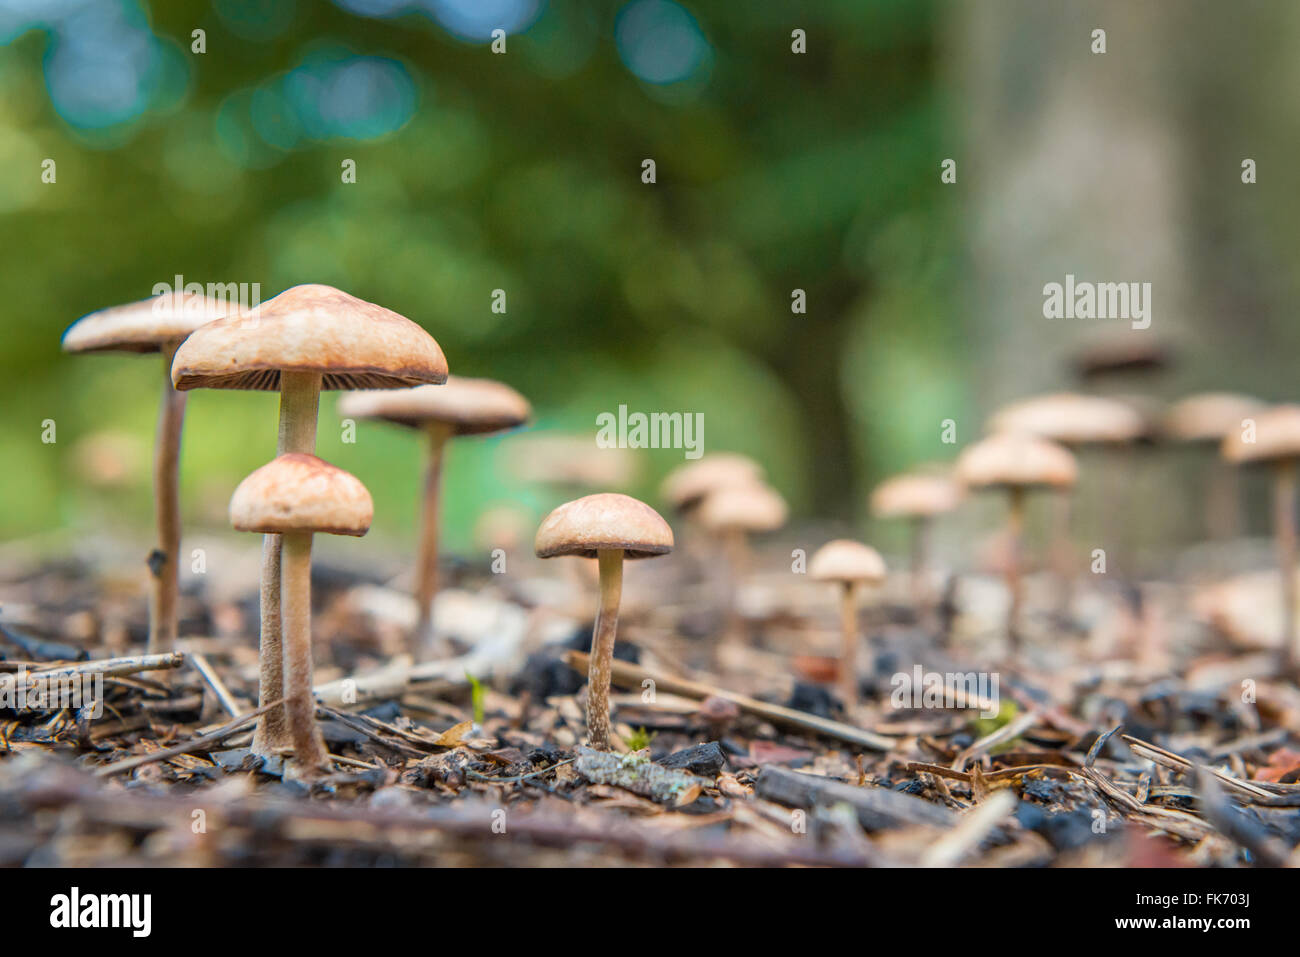 Mushrooms with blur background and foreground in a park Stock Photo